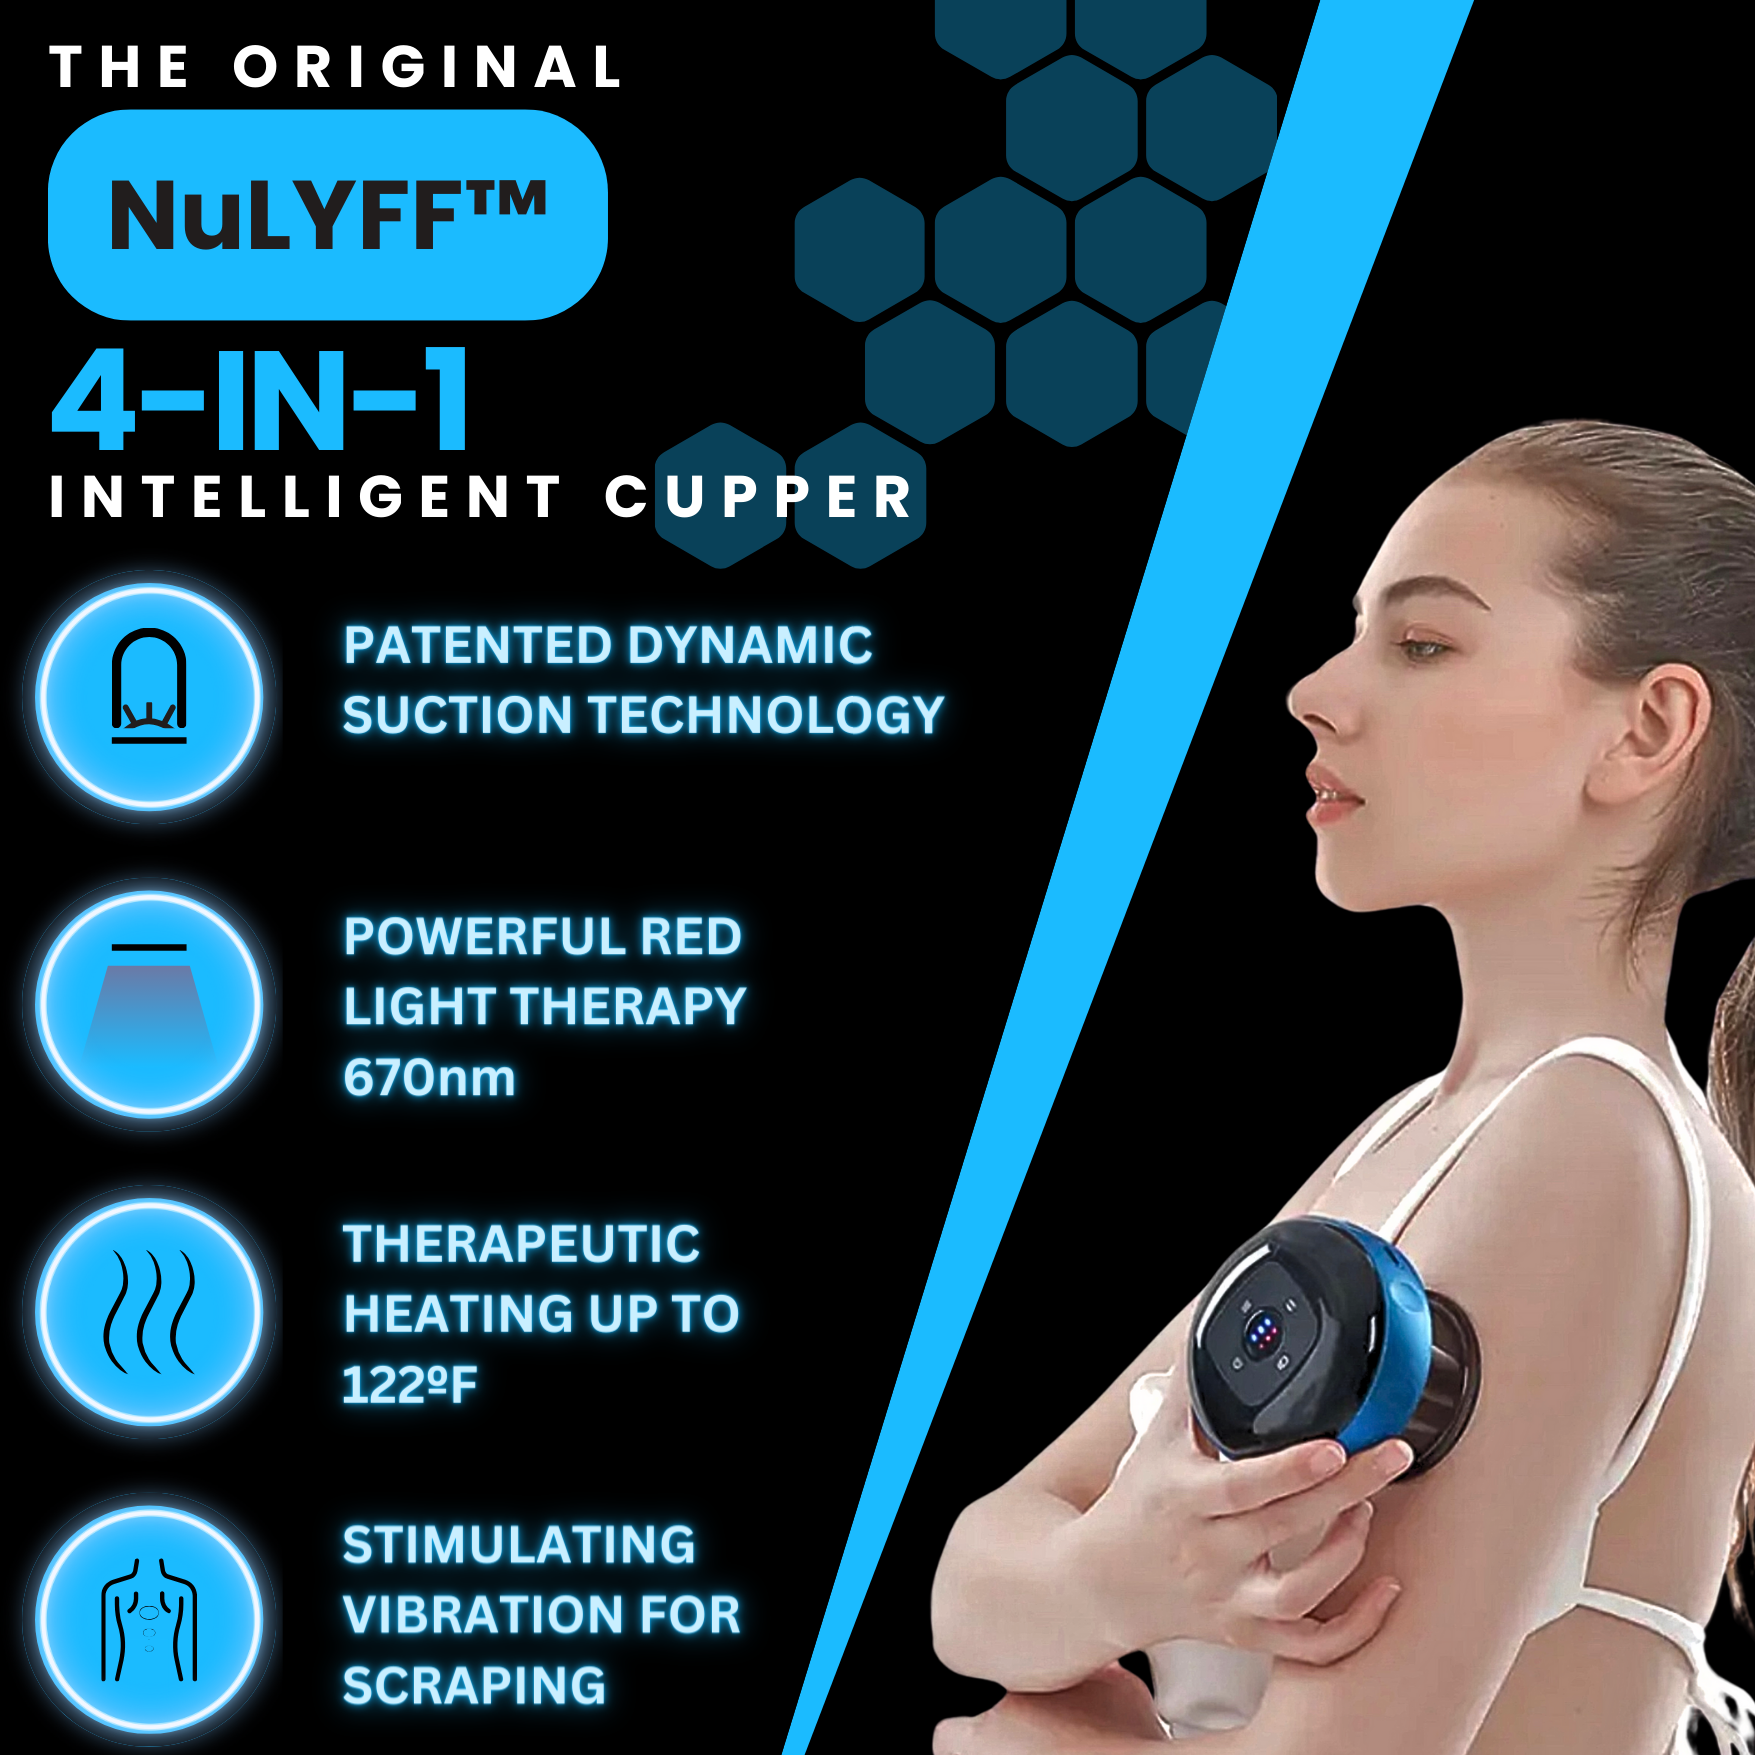 Image of The Original NuLYFF™ 4-in-1 Intelligent Cupper showing off its Patented Dynamic Suction Technology, Powerful Red Light Therapy 670nm, Therapeutic Heating up to 122F, and Stimulating Vibration for scraping. Right Side has a female model holding the cupping device to her left arm as she enjoys its benefits.